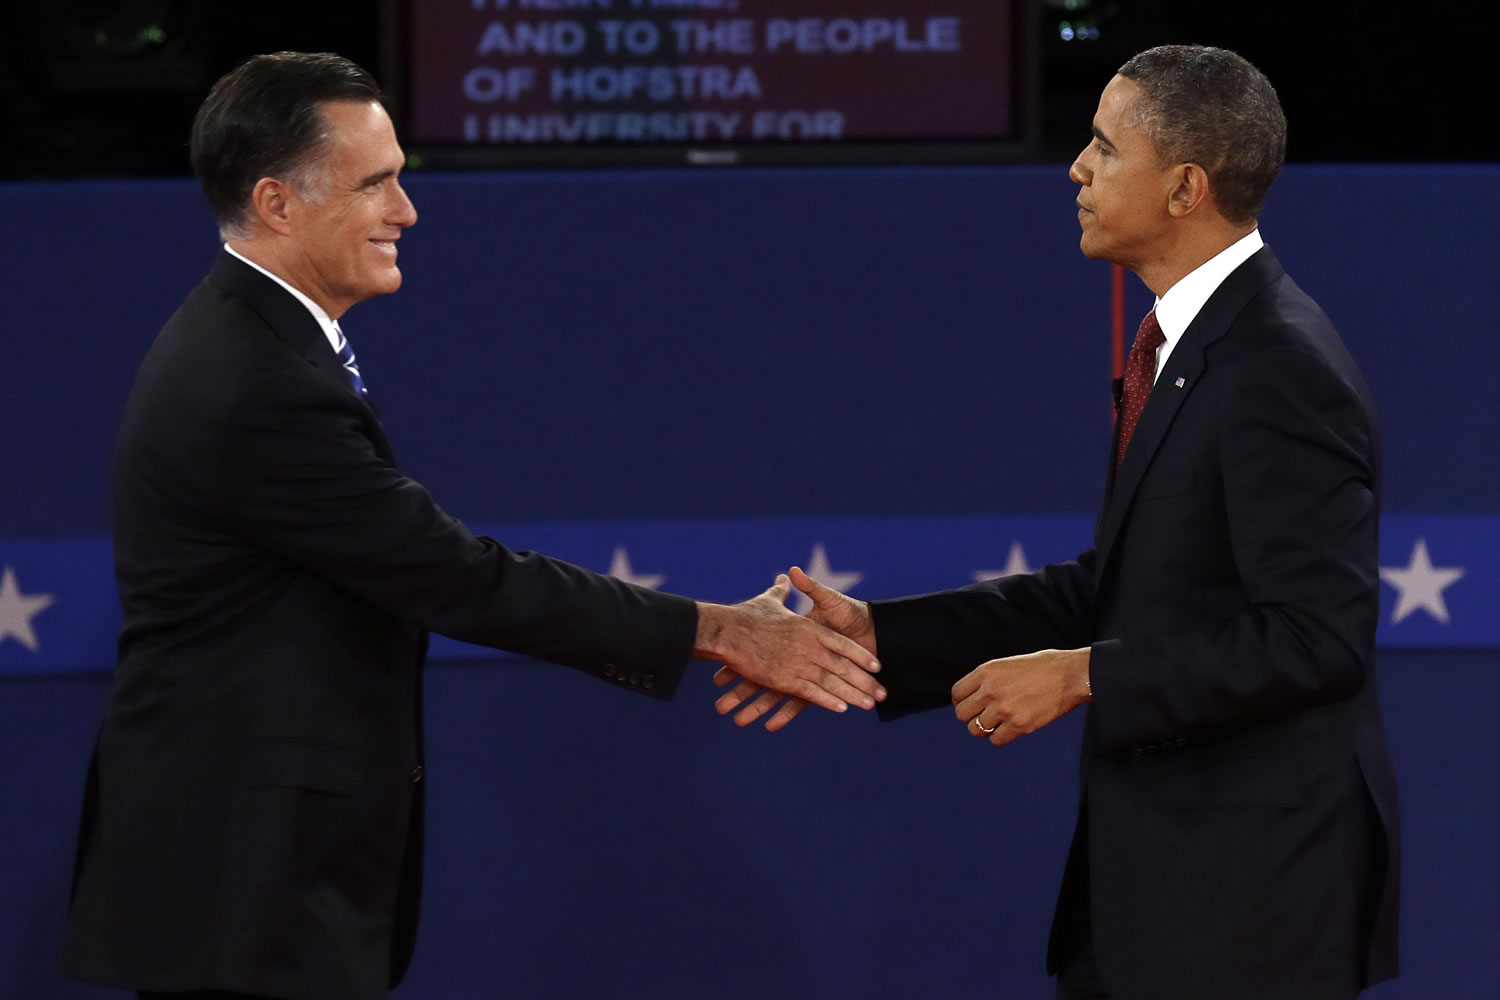 Republican presidential nominee Mitt Romney  and President Barack Obama shake hands after the second presidential debate at Hofstra University, Tuesday, Oct. 16, 2012, in Hempstead, N.Y.